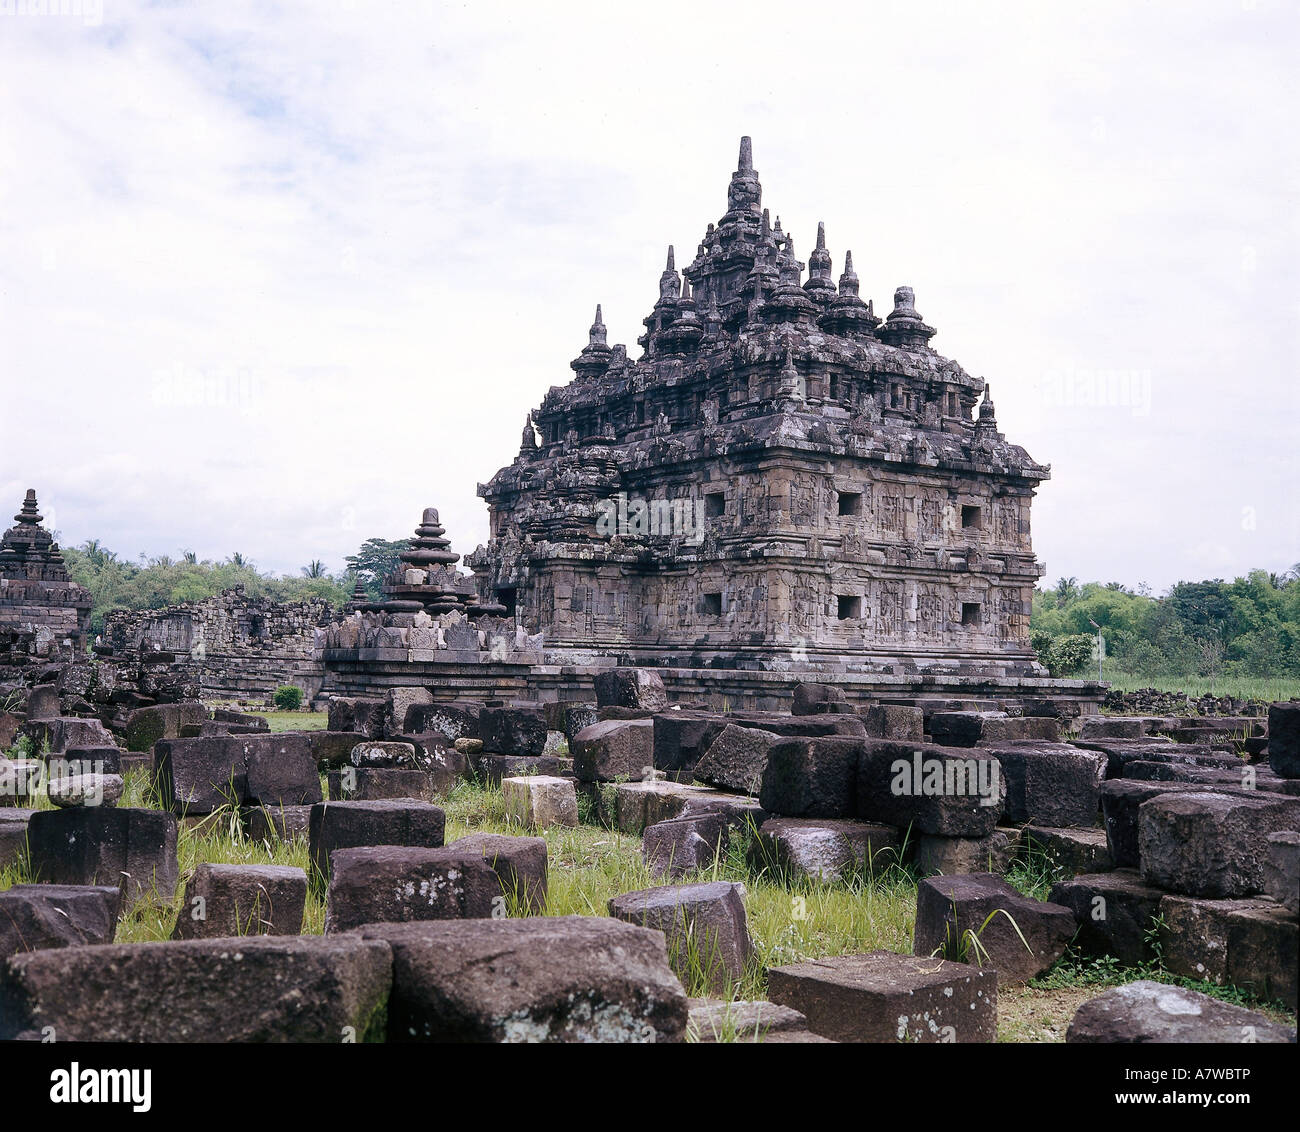 geography / travel, Indonesia, Java, temple Candi Plaosan, donatated by King Rakai Pikatan, around 850 AD, building, exterior view, religion, temple area, Chandi, buddhism, architecture, Schailendra, Shailendra, Zen buddhism, valley, historical, historic, ancient, ruin, stone blocks, ruins, Additional-Rights-Clearance-Info-Not-Available Stock Photo